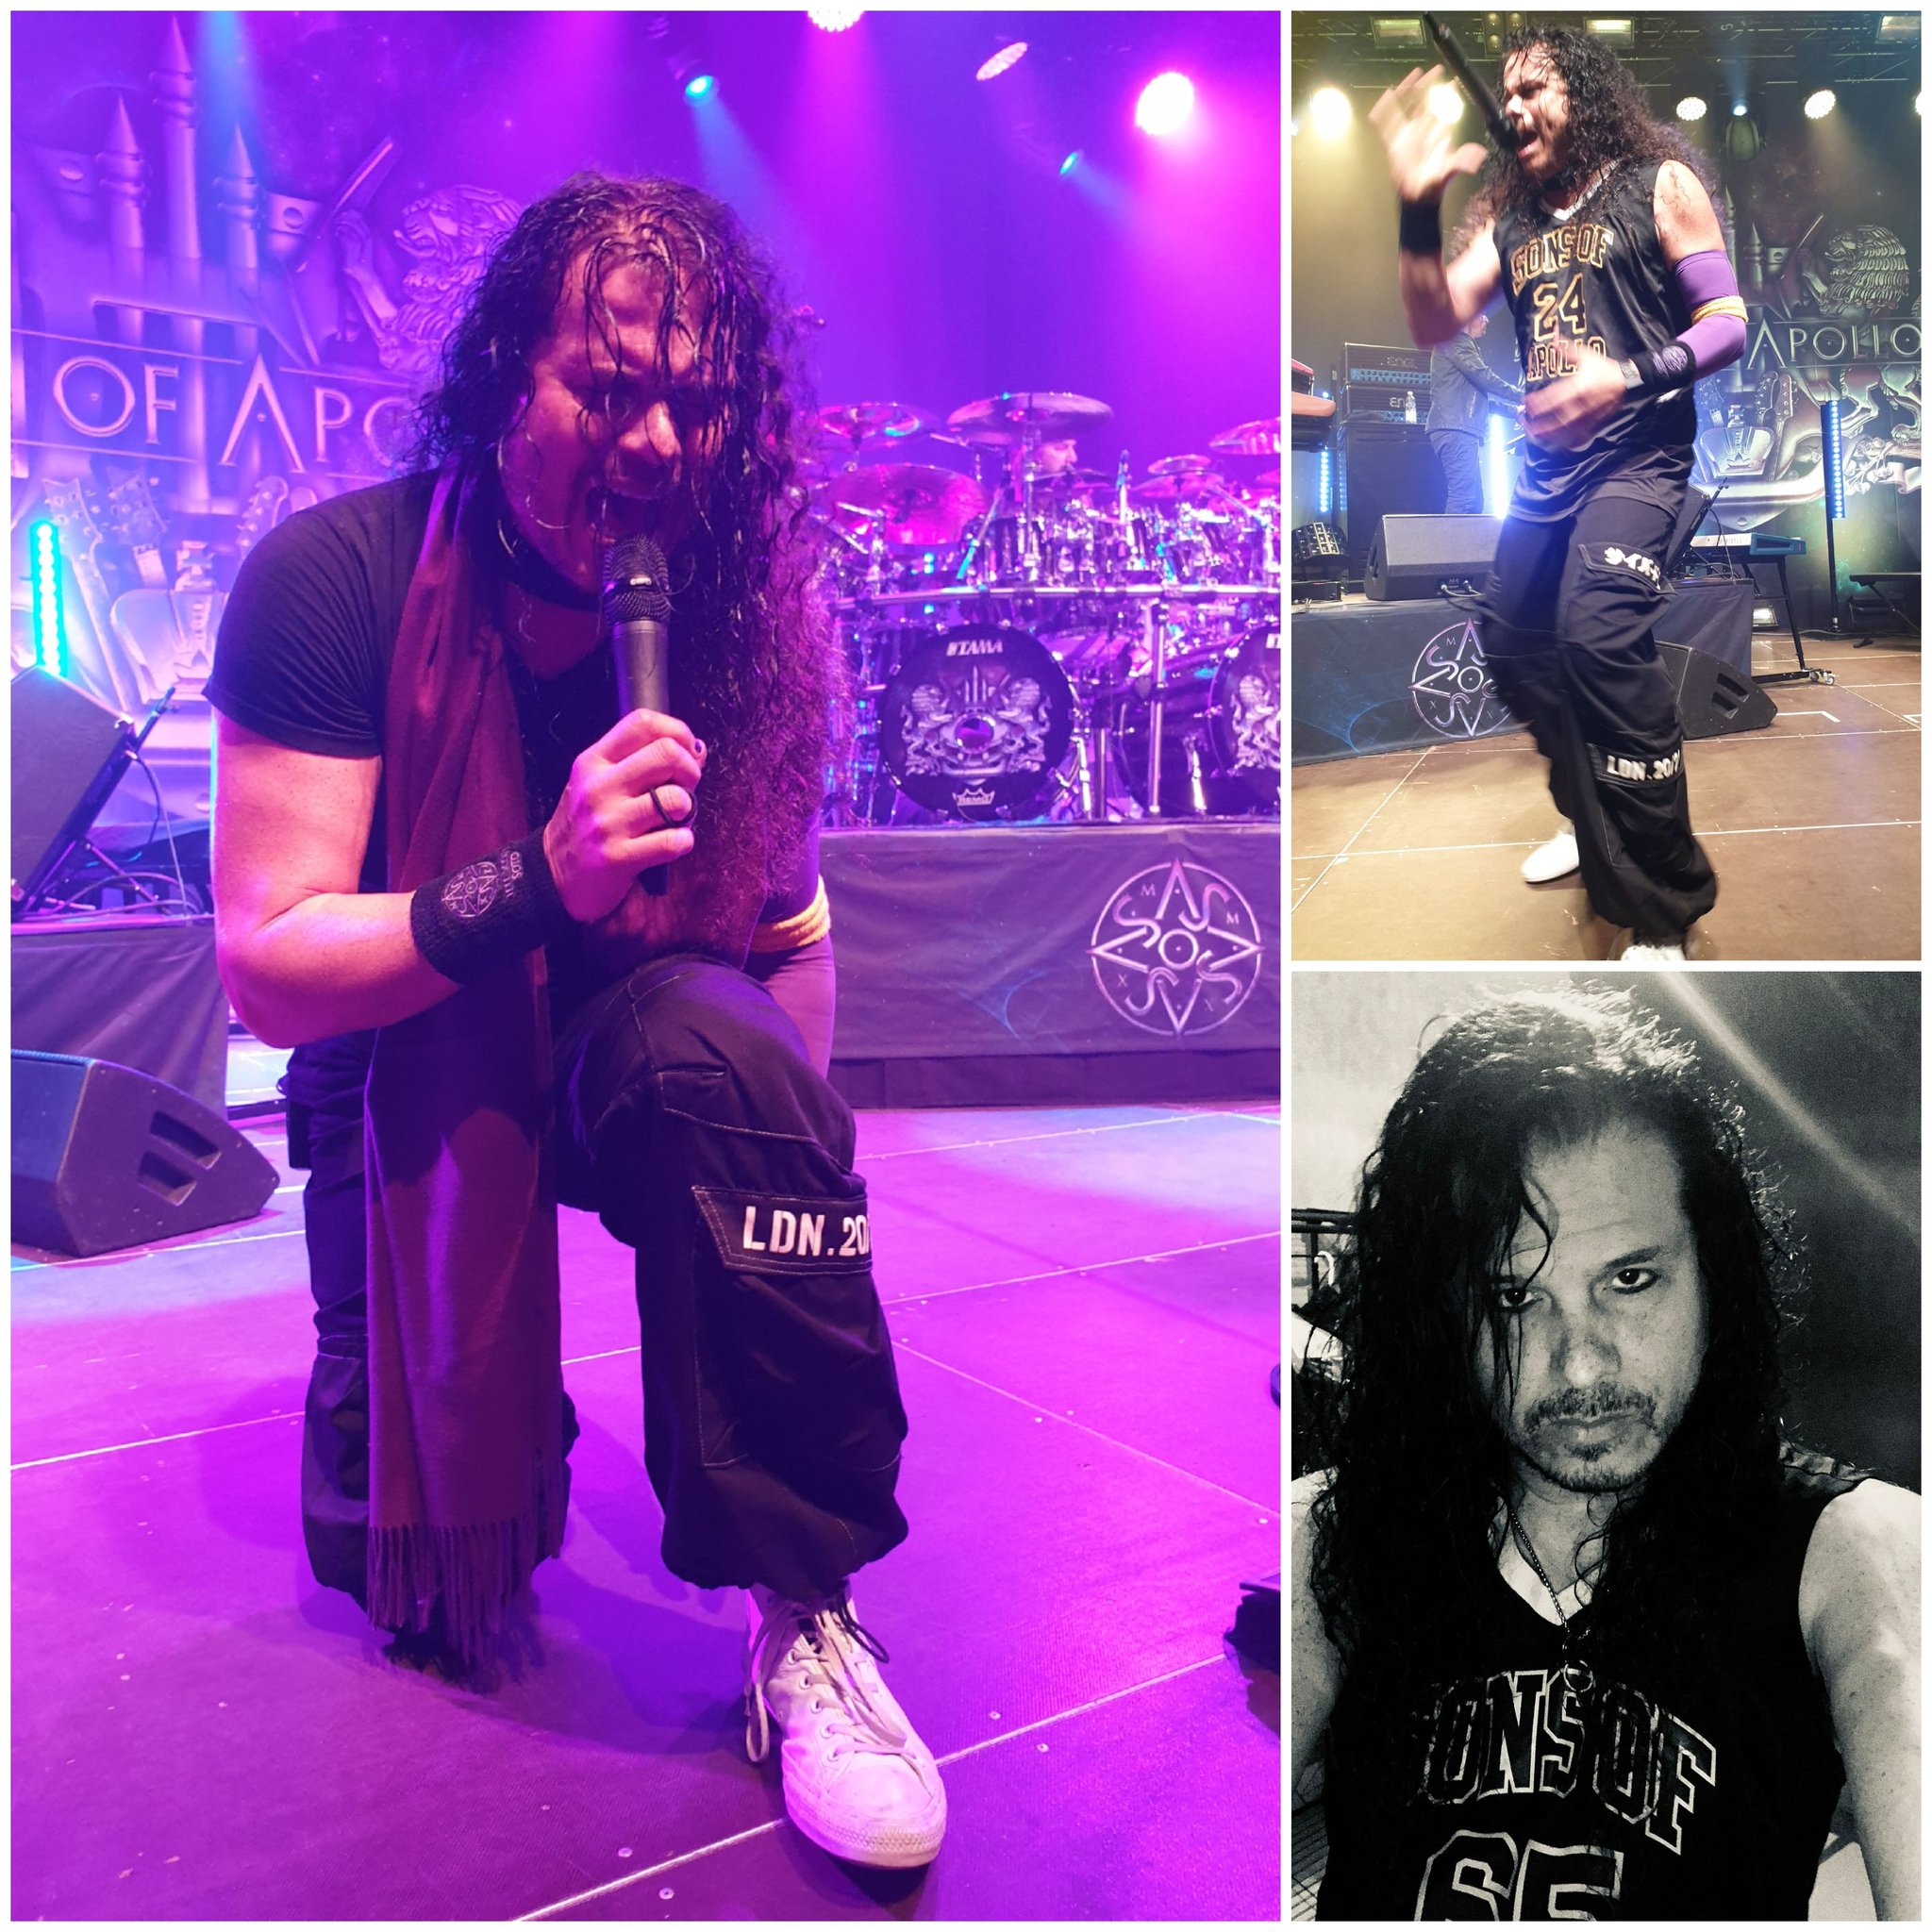 Happy Birthday to the amazing Jeff Scott Soto .
Best wishes and much love from Germany.       